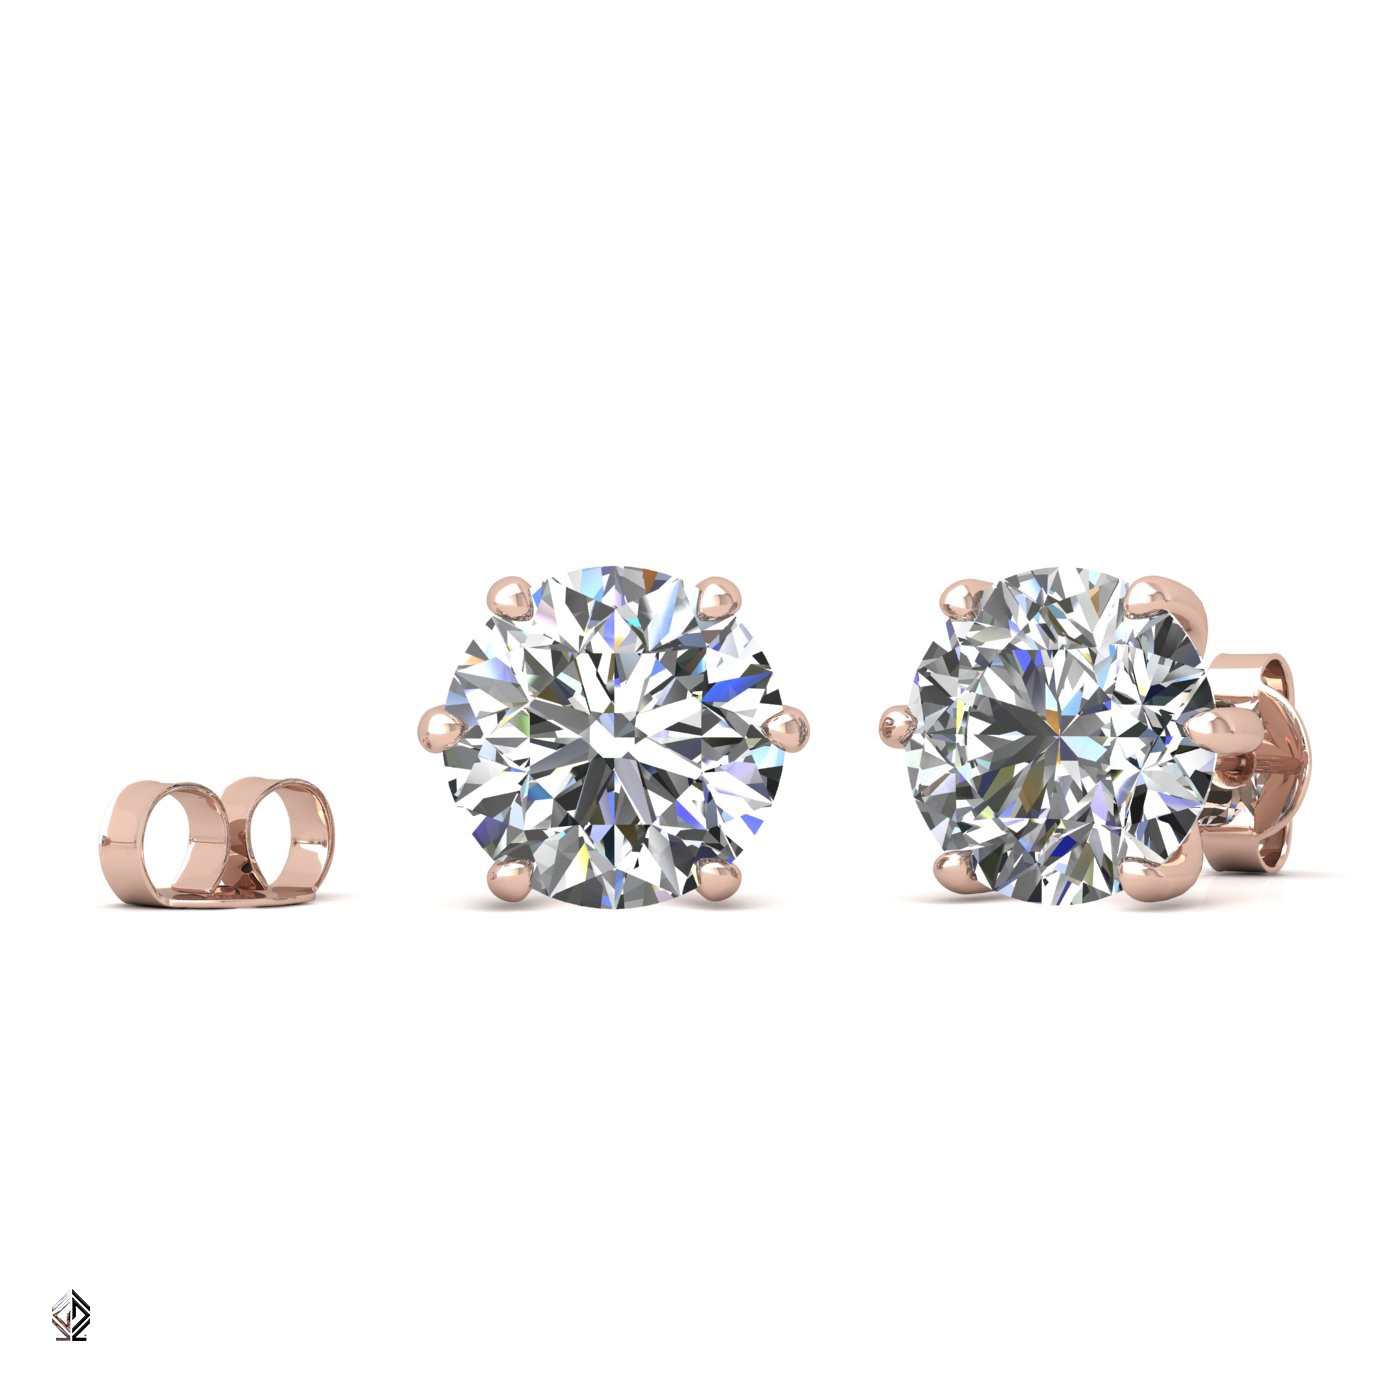 18k rose gold 0,7 ct each (1,4 tcw) 6 prongs round shape diamond earrings Photos & images